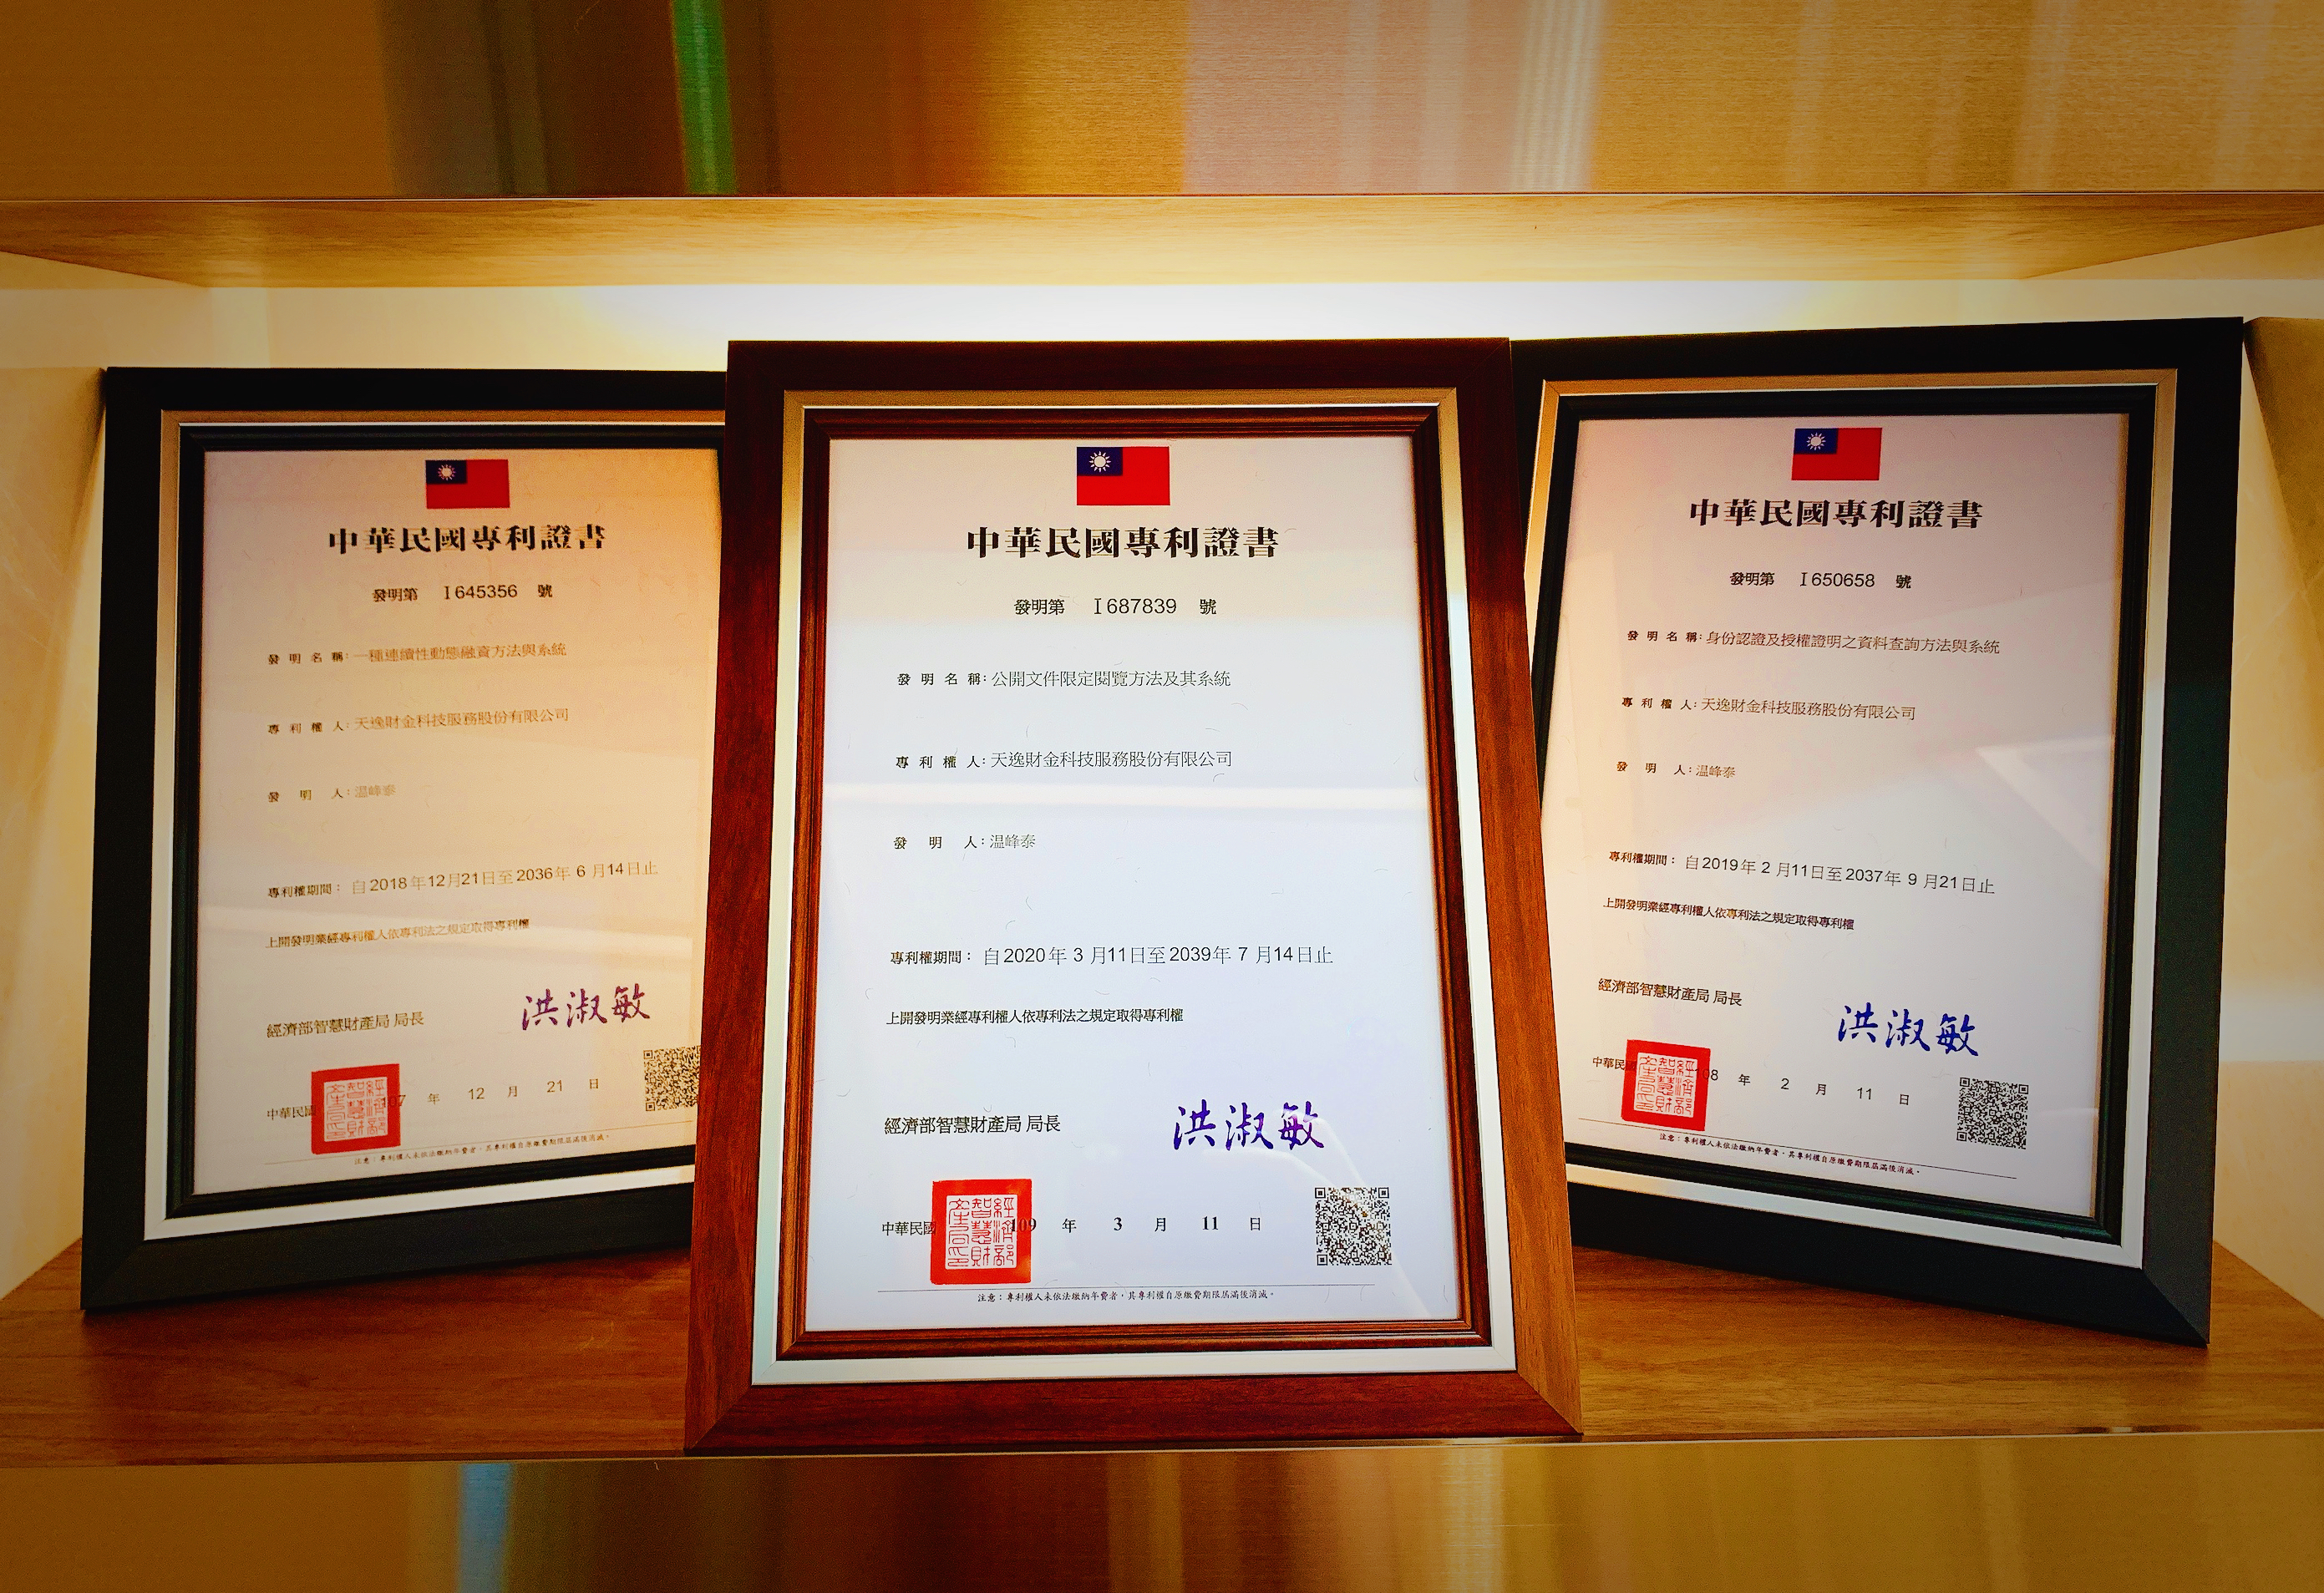 VTeam Financial Services Group won the eighth patent certificate, which shows up innovative technology of VTeam is up to a higher level 